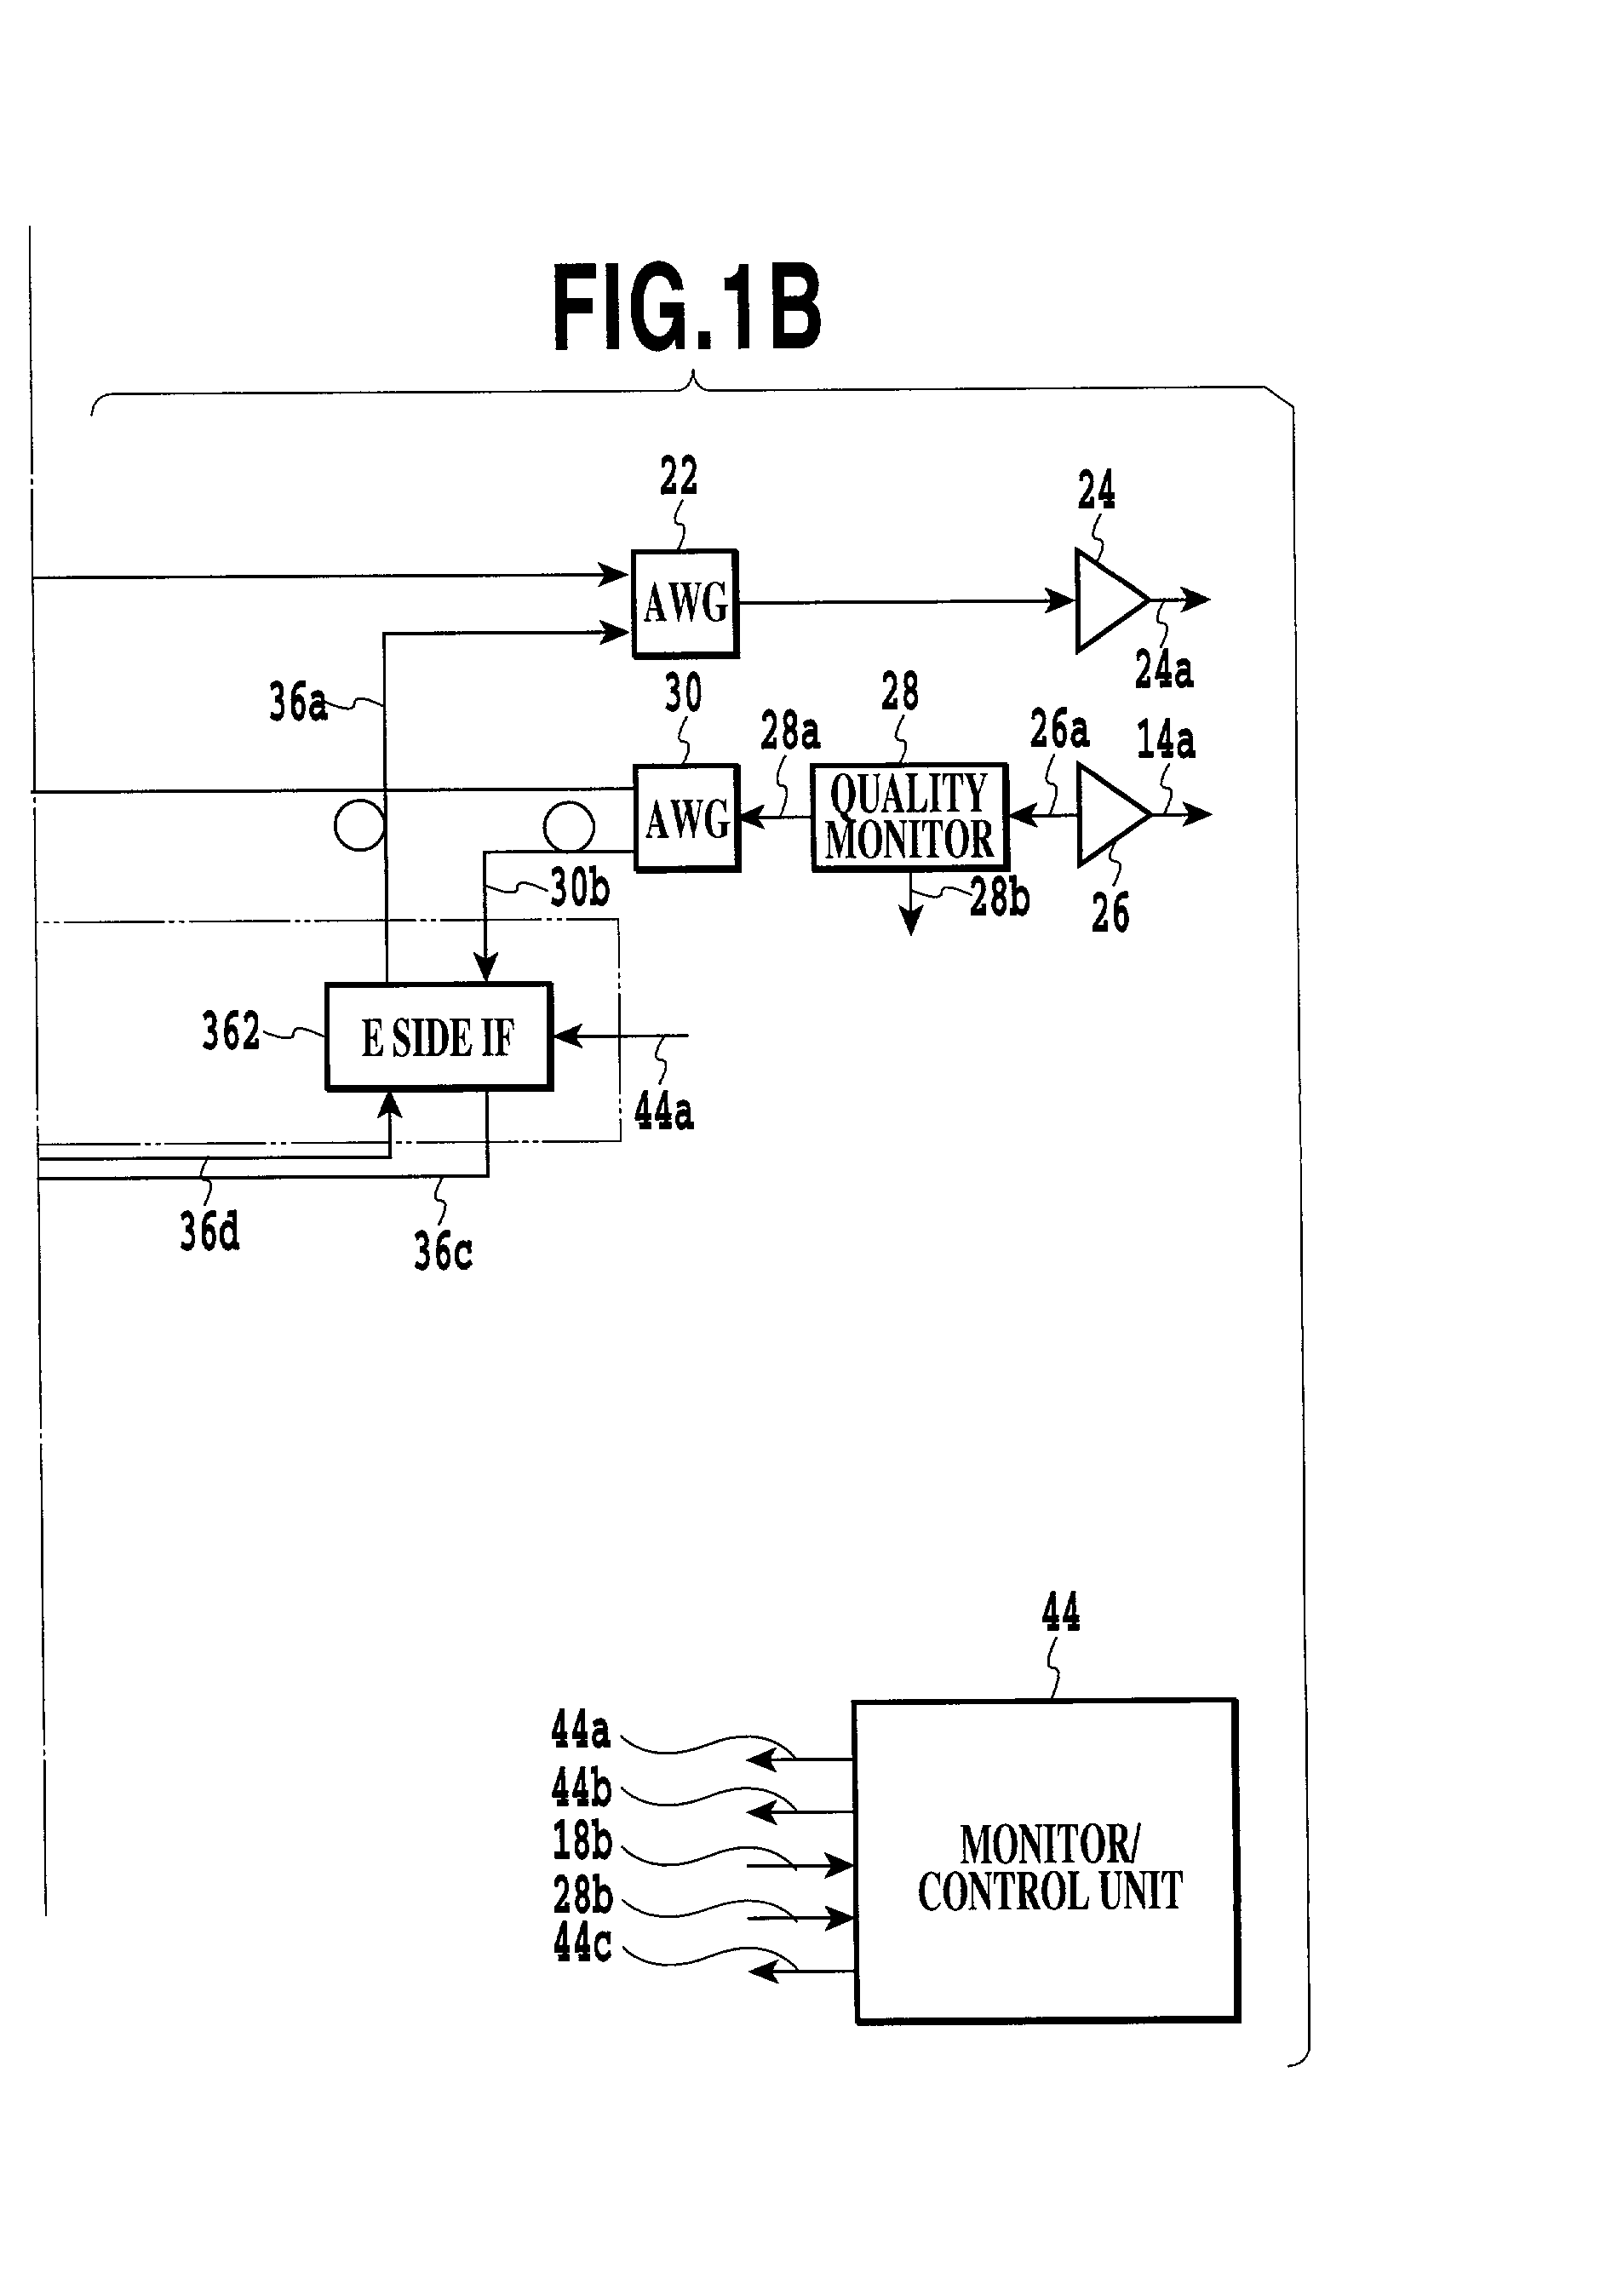 Optical transmission apparatus with an optimal routing and data transmitting capability and a method of determining an optimal route on optical transmission